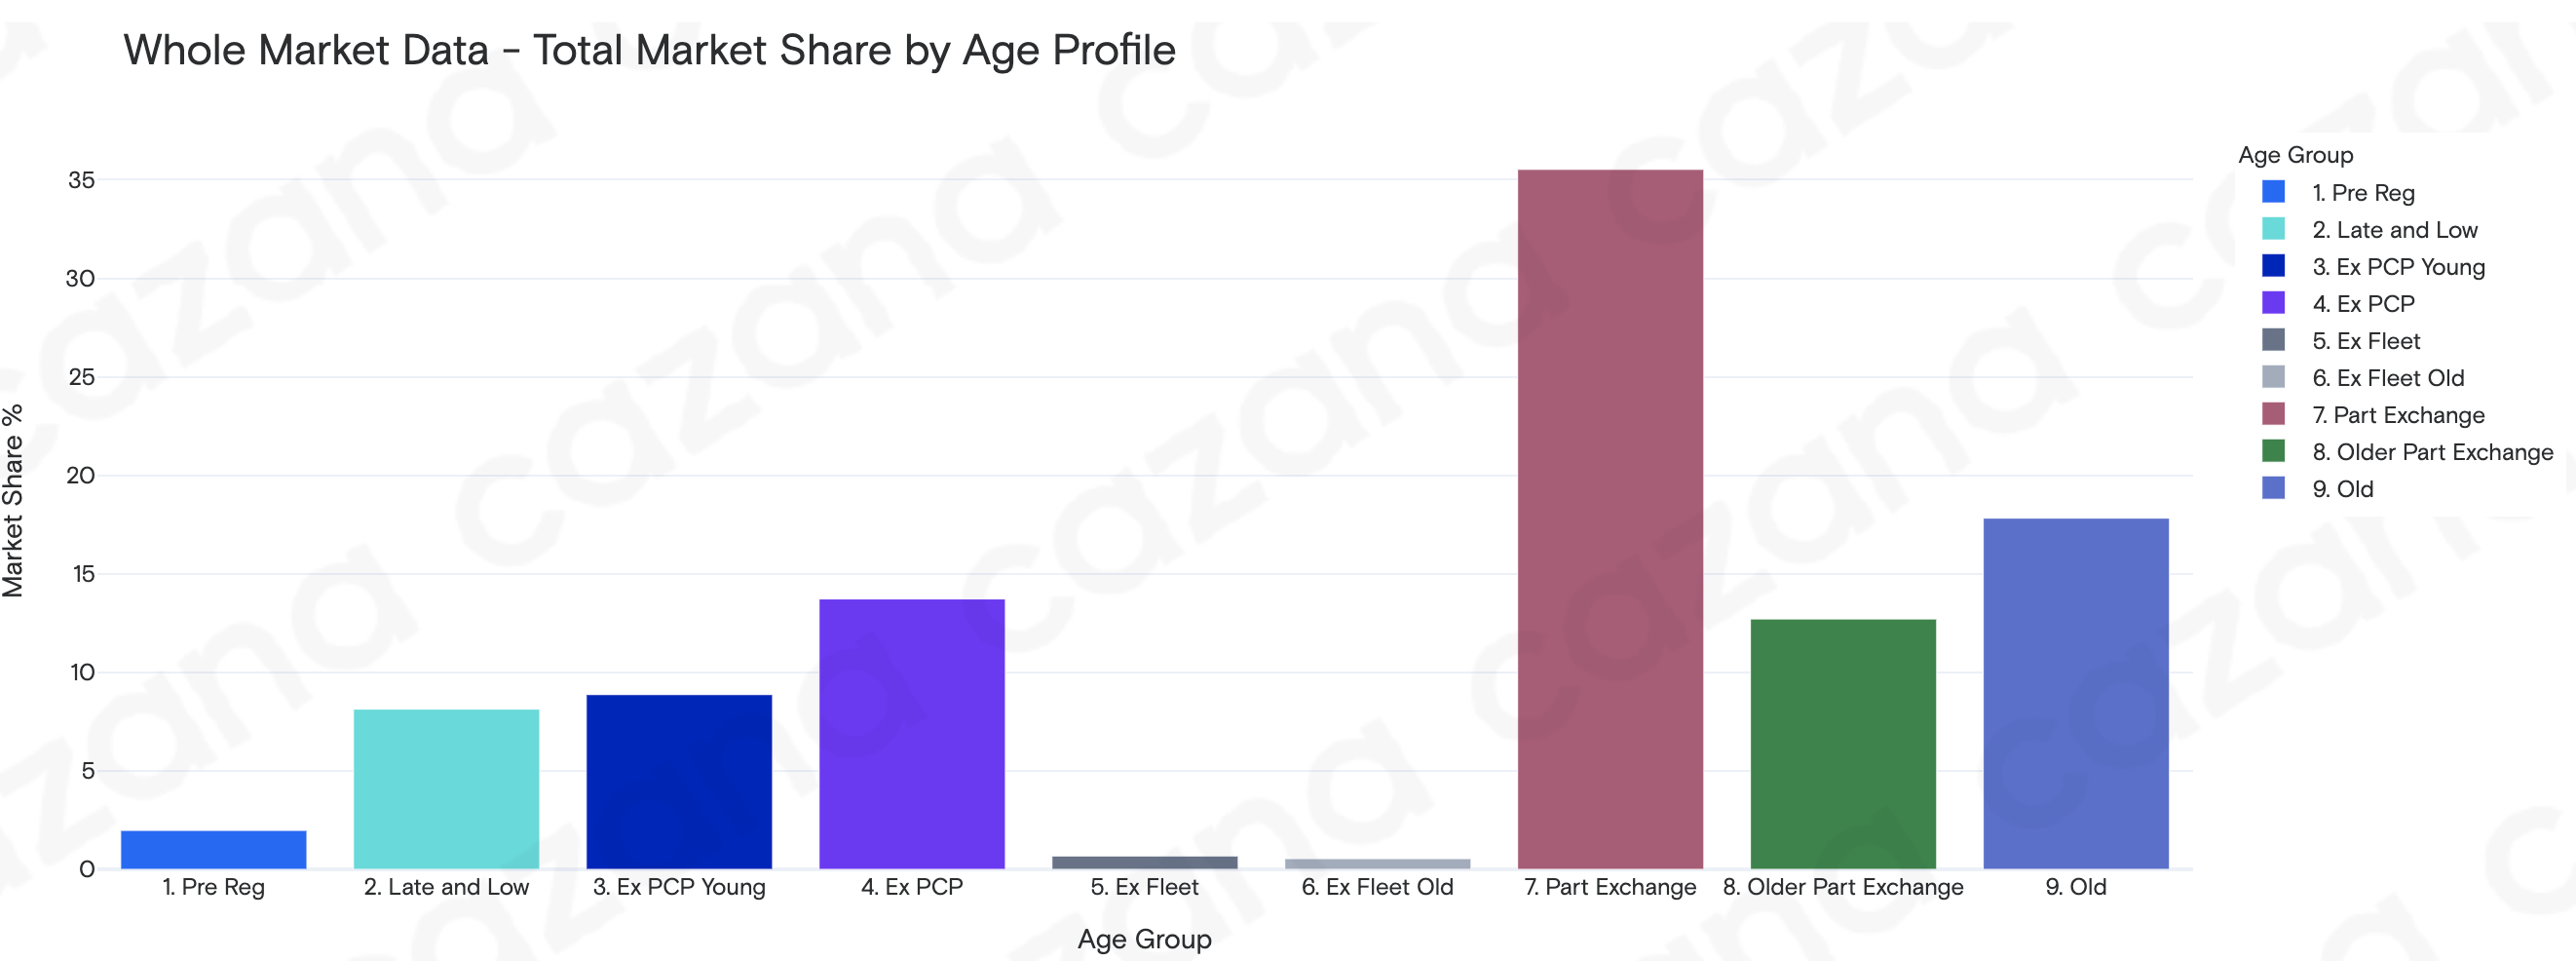 Total market share by age profile - 27.07.21